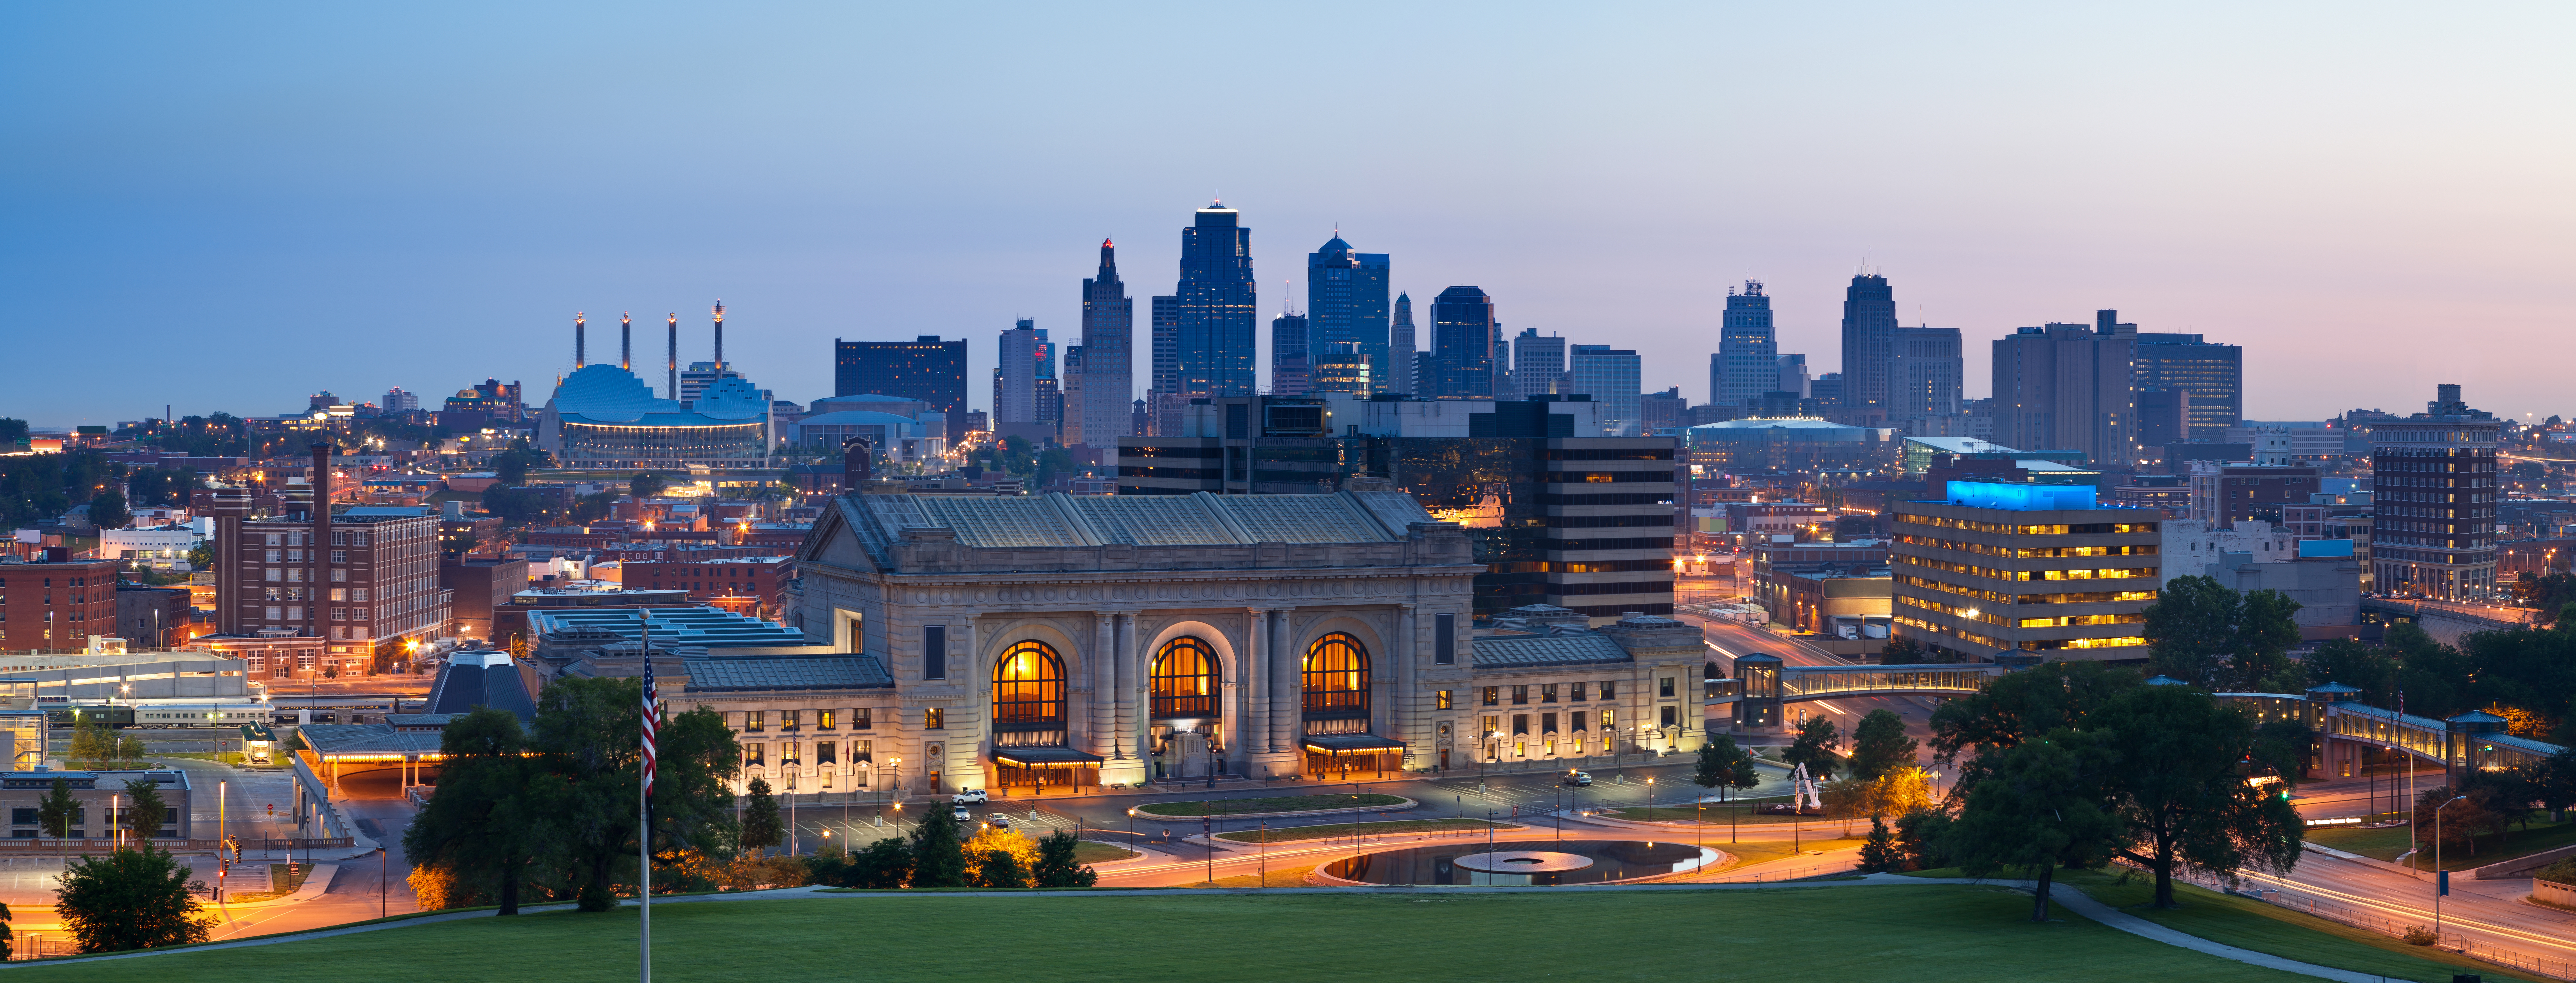 View of Kansas City from the World War I Monument and Museum with Union Station in the foreground.